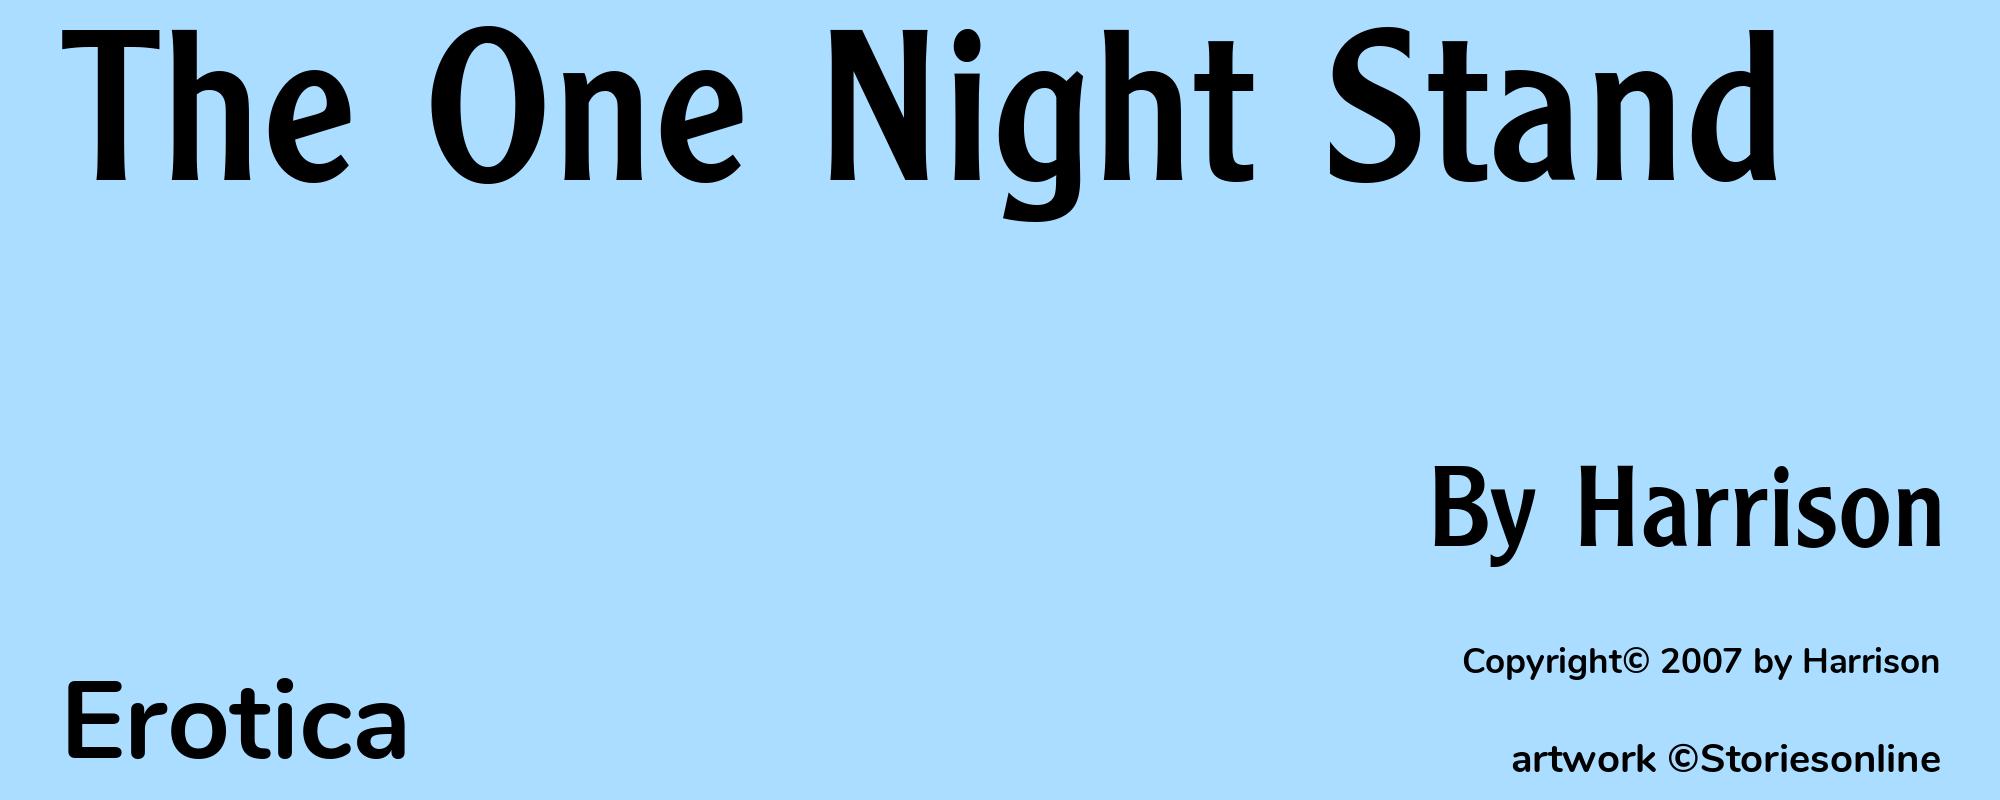 The One Night Stand - Cover